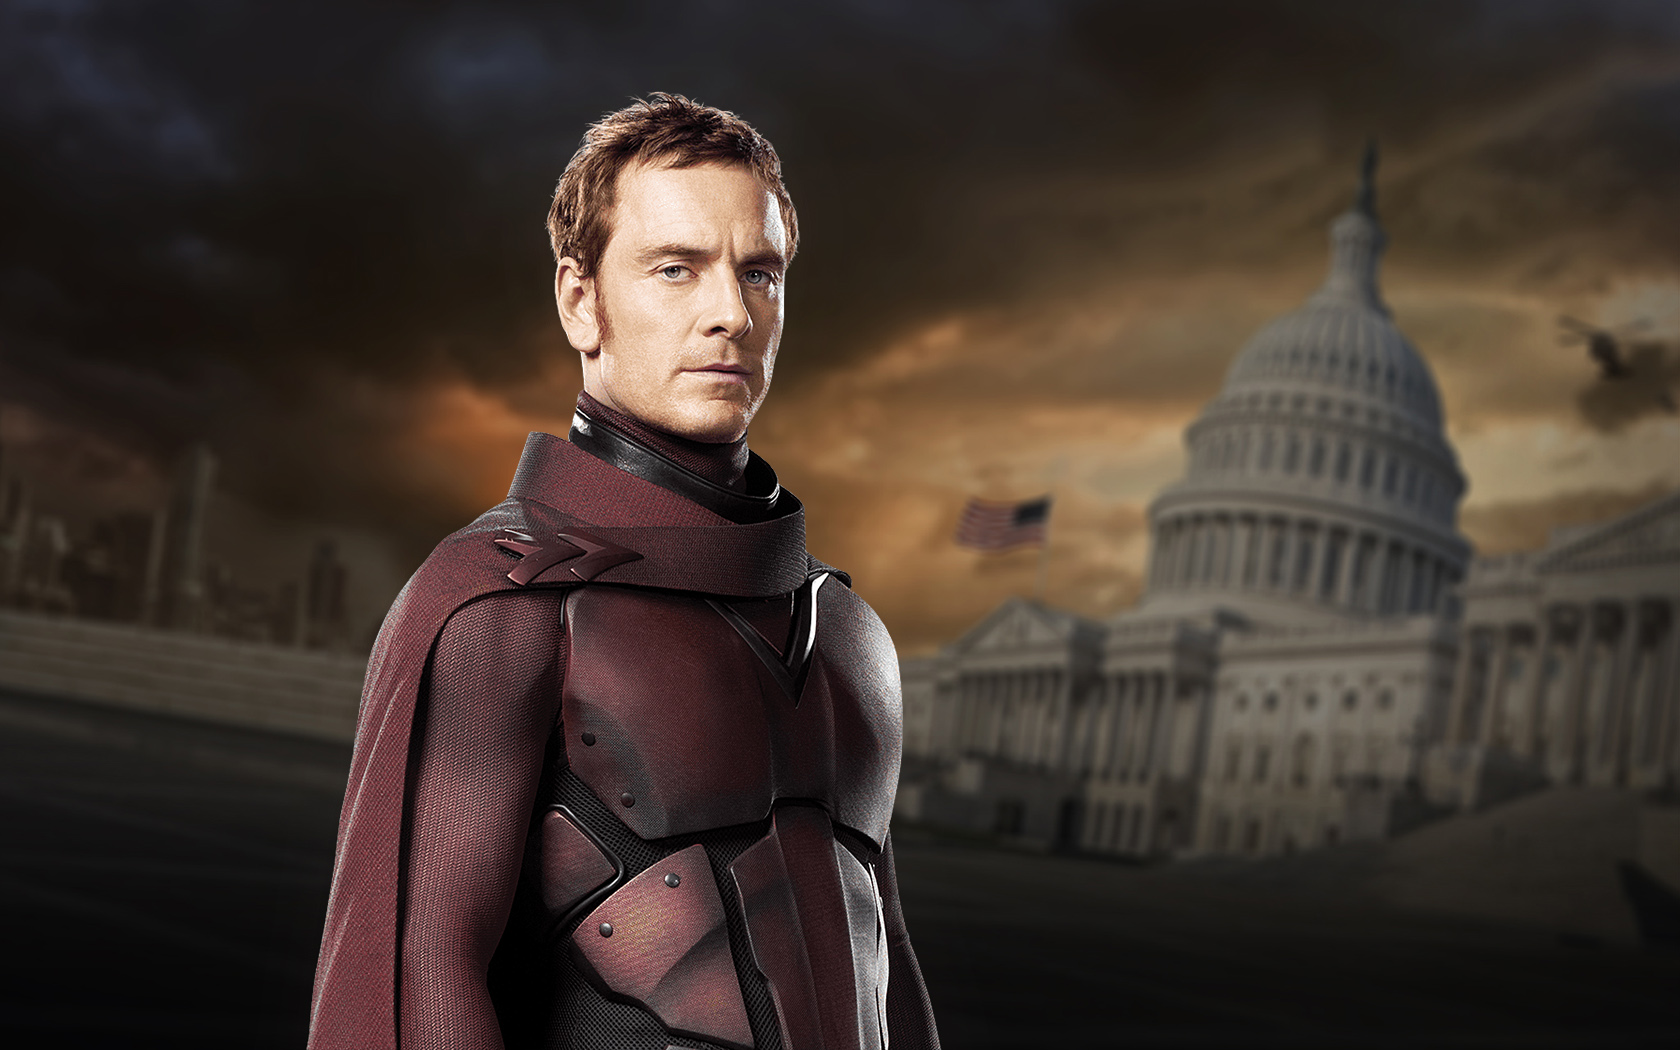 Michael Fassbender as the new Magneto in X-Men Days of the Future Past.